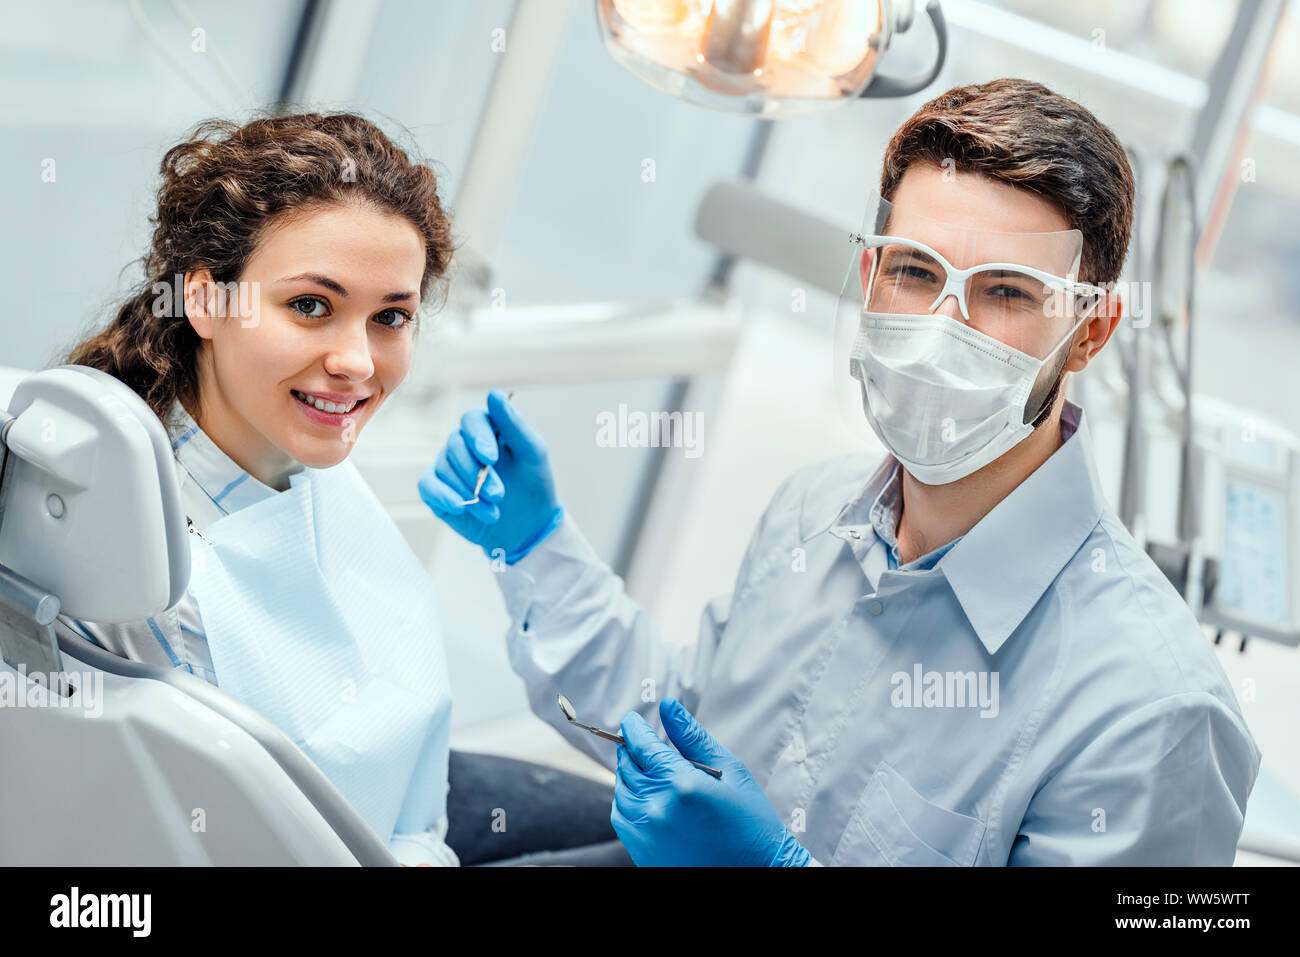 Young woman having check up and dental exam at dentist. Side view. Stock Photo